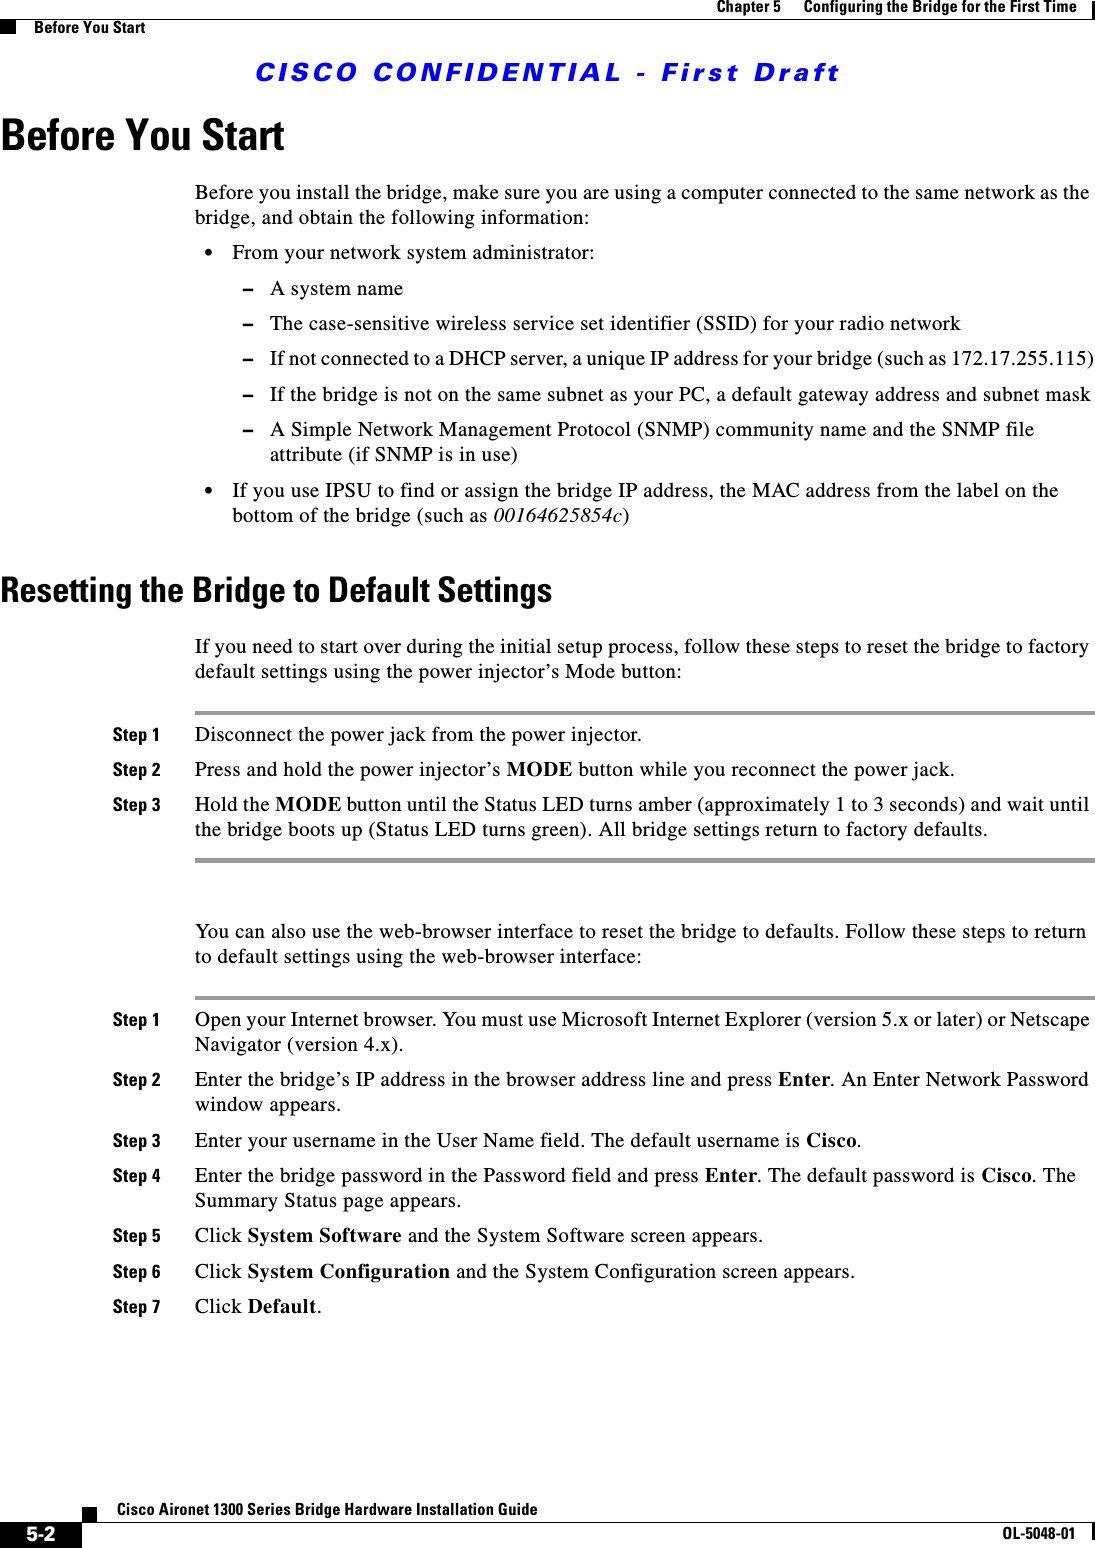 CISCO CONFIDENTIAL - First Draft5-2Cisco Aironet 1300 Series Bridge Hardware Installation GuideOL-5048-01Chapter 5      Configuring the Bridge for the First TimeBefore You StartBefore You StartBefore you install the bridge, make sure you are using a computer connected to the same network as the bridge, and obtain the following information:•From your network system administrator:–A system name–The case-sensitive wireless service set identifier (SSID) for your radio network–If not connected to a DHCP server, a unique IP address for your bridge (such as 172.17.255.115)–If the bridge is not on the same subnet as your PC, a default gateway address and subnet mask–A Simple Network Management Protocol (SNMP) community name and the SNMP file attribute (if SNMP is in use)•If you use IPSU to find or assign the bridge IP address, the MAC address from the label on the bottom of the bridge (such as 00164625854c)Resetting the Bridge to Default SettingsIf you need to start over during the initial setup process, follow these steps to reset the bridge to factory default settings using the power injector’s Mode button:Step 1 Disconnect the power jack from the power injector.Step 2 Press and hold the power injector’s MODE button while you reconnect the power jack.Step 3 Hold the MODE button until the Status LED turns amber (approximately 1 to 3 seconds) and wait until the bridge boots up (Status LED turns green). All bridge settings return to factory defaults.You can also use the web-browser interface to reset the bridge to defaults. Follow these steps to return to default settings using the web-browser interface:Step 1 Open your Internet browser. You must use Microsoft Internet Explorer (version 5.x or later) or Netscape Navigator (version 4.x).Step 2 Enter the bridge’s IP address in the browser address line and press Enter. An Enter Network Password window appears.Step 3 Enter your username in the User Name field. The default username is Cisco.Step 4 Enter the bridge password in the Password field and press Enter. The default password is Cisco. The Summary Status page appears.Step 5 Click System Software and the System Software screen appears.Step 6 Click System Configuration and the System Configuration screen appears.Step 7 Click Default.